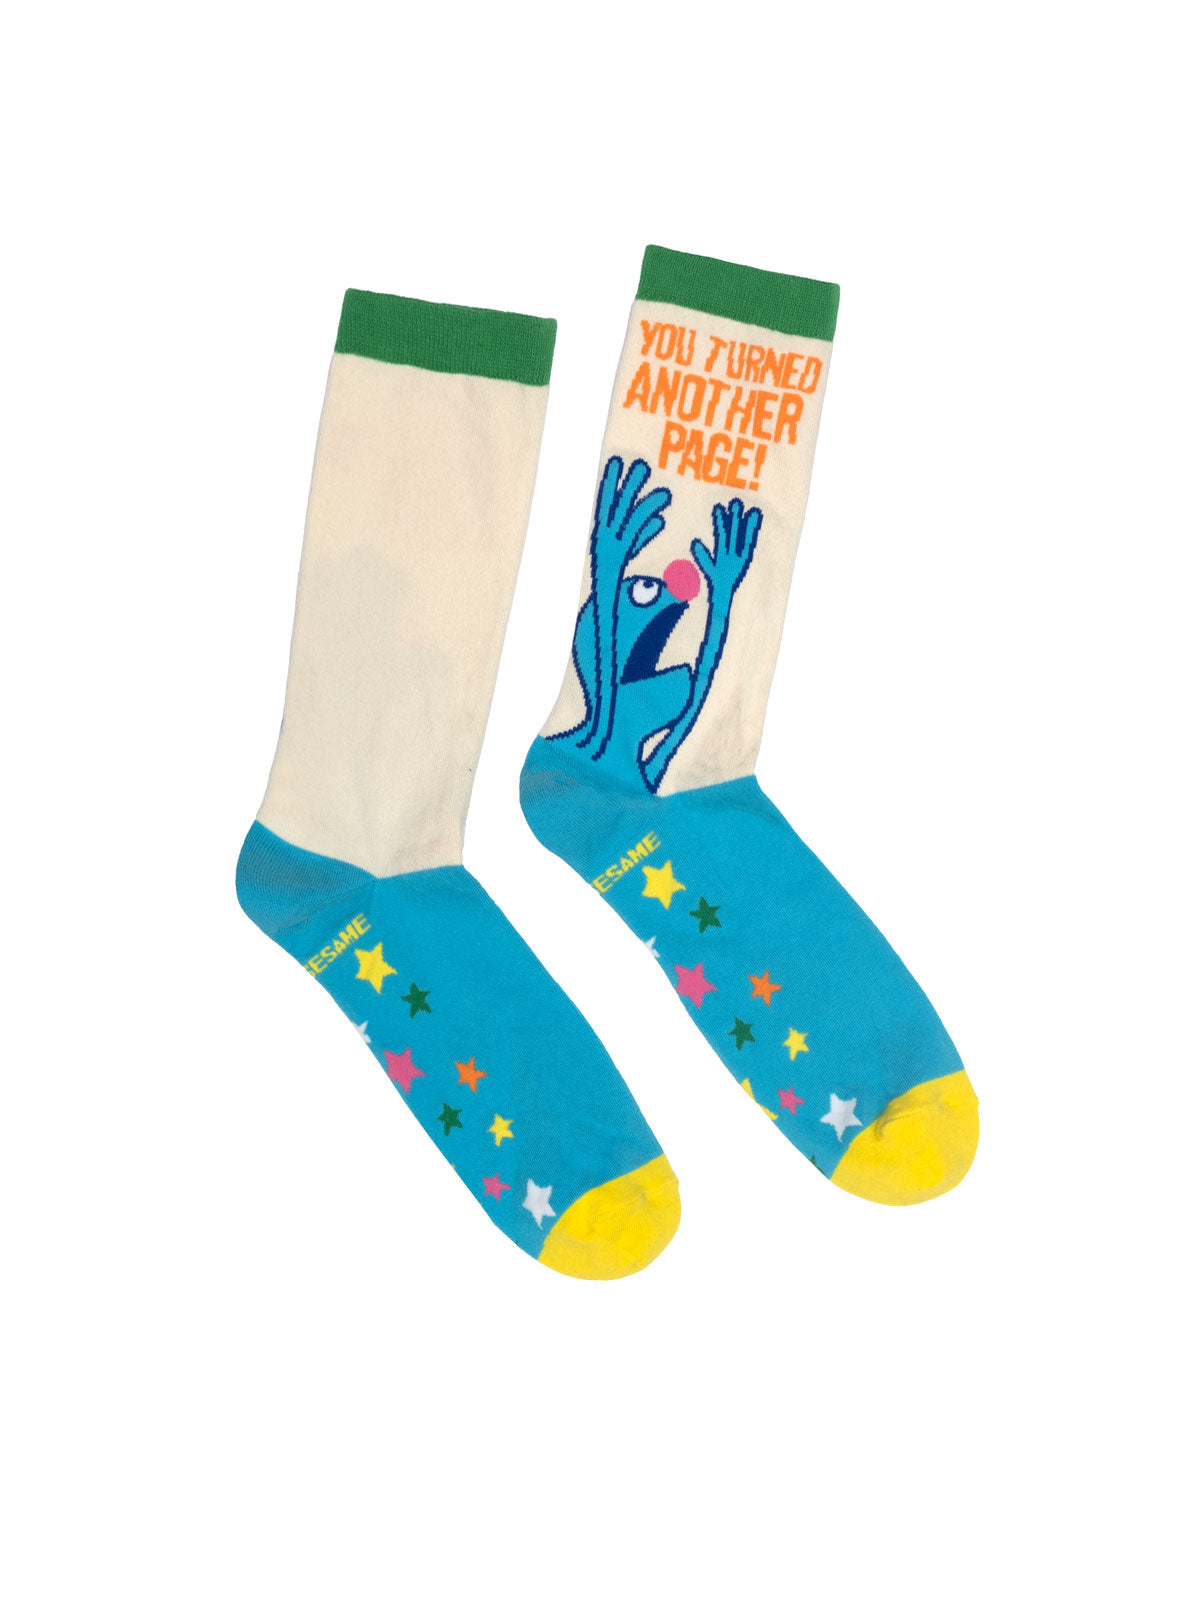 Sesame Street - The Monster at the End of This Book socks — Out of Print